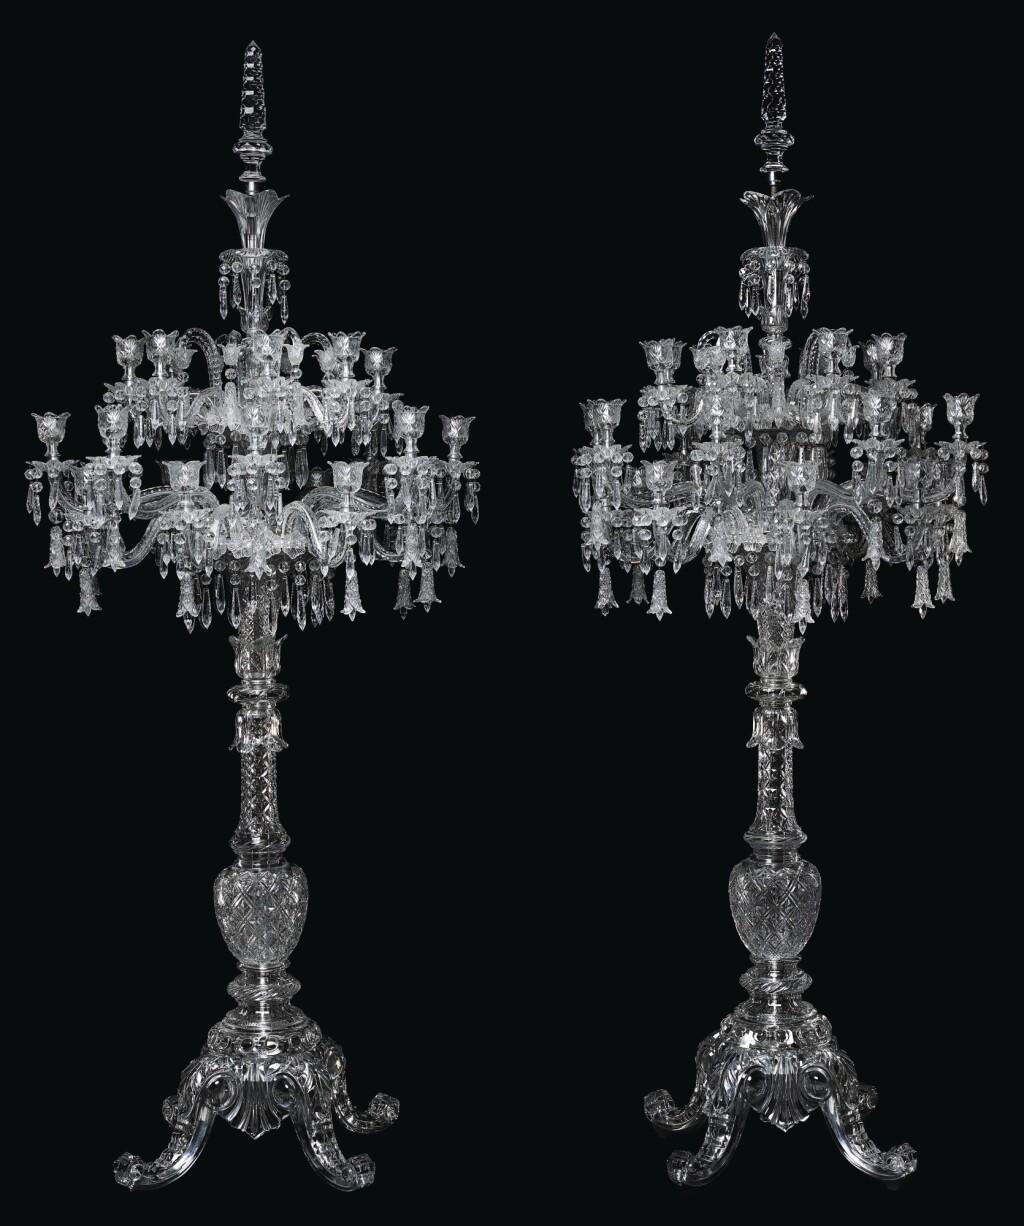 20th Century Cristalleries De Baccarat, a Large Pair of French Cut-Crystal Tsarine Torcheres